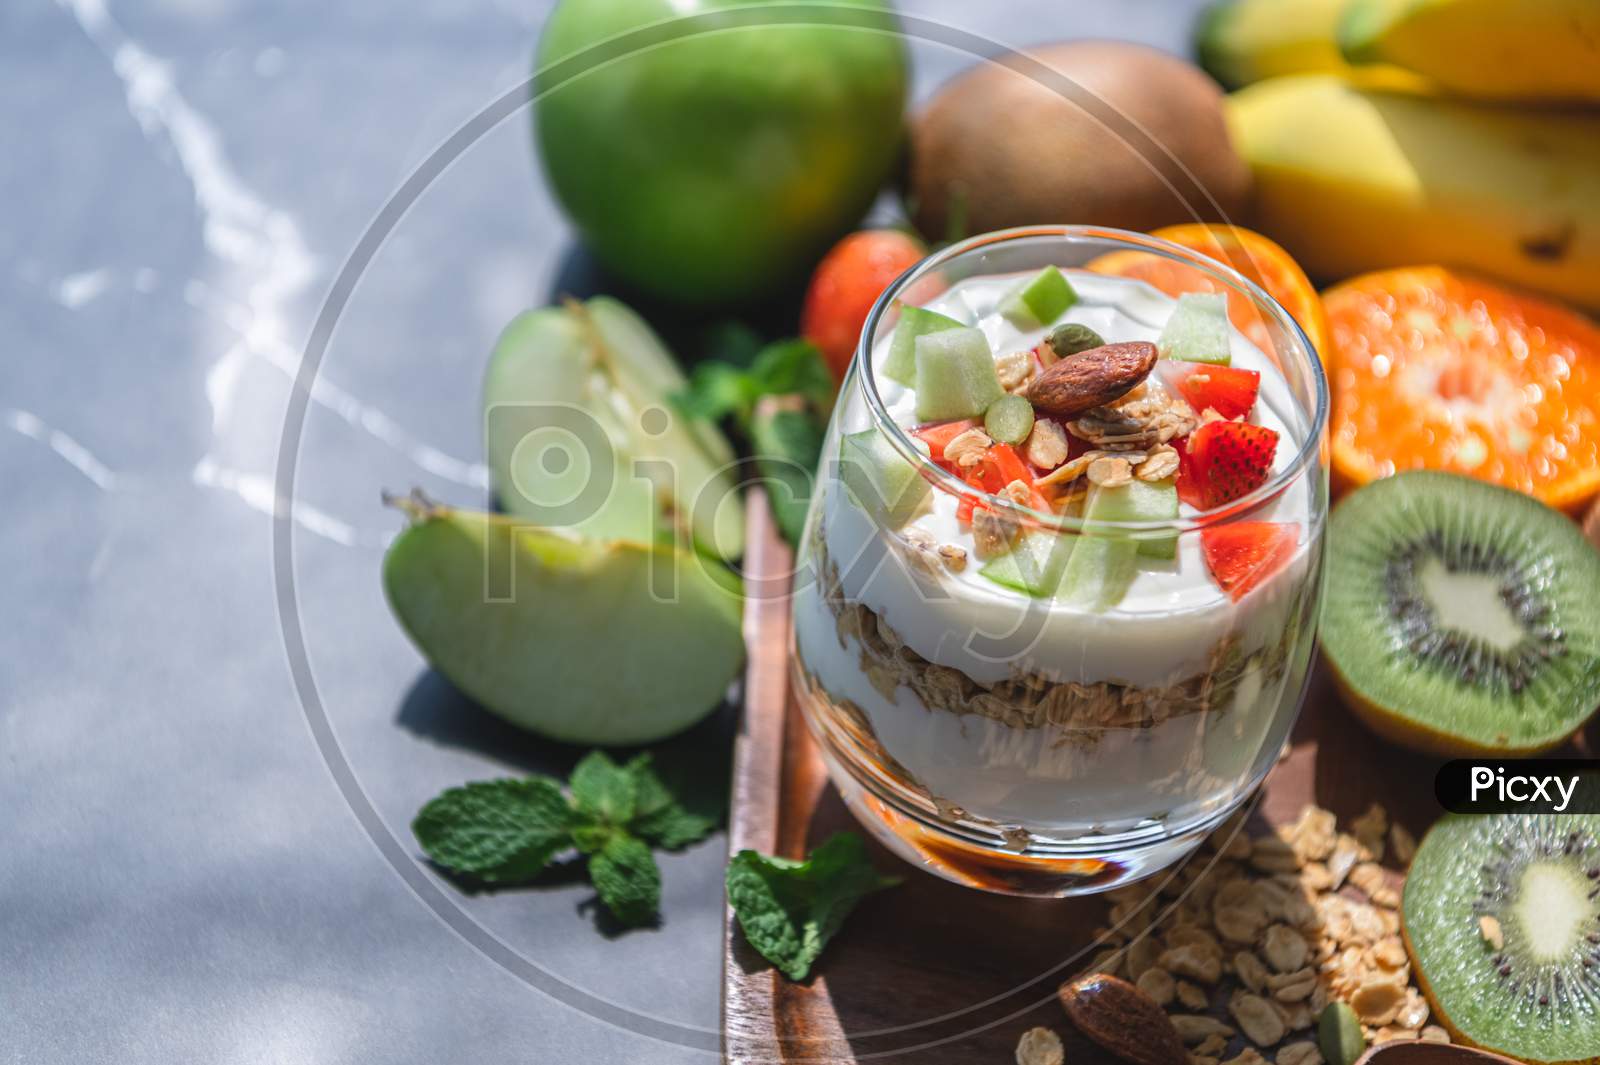 Closeup Nutrition Yogurt With Many Fruits On Table. Food Cuisine And Drinks Concept. Organic Dessert Theme.